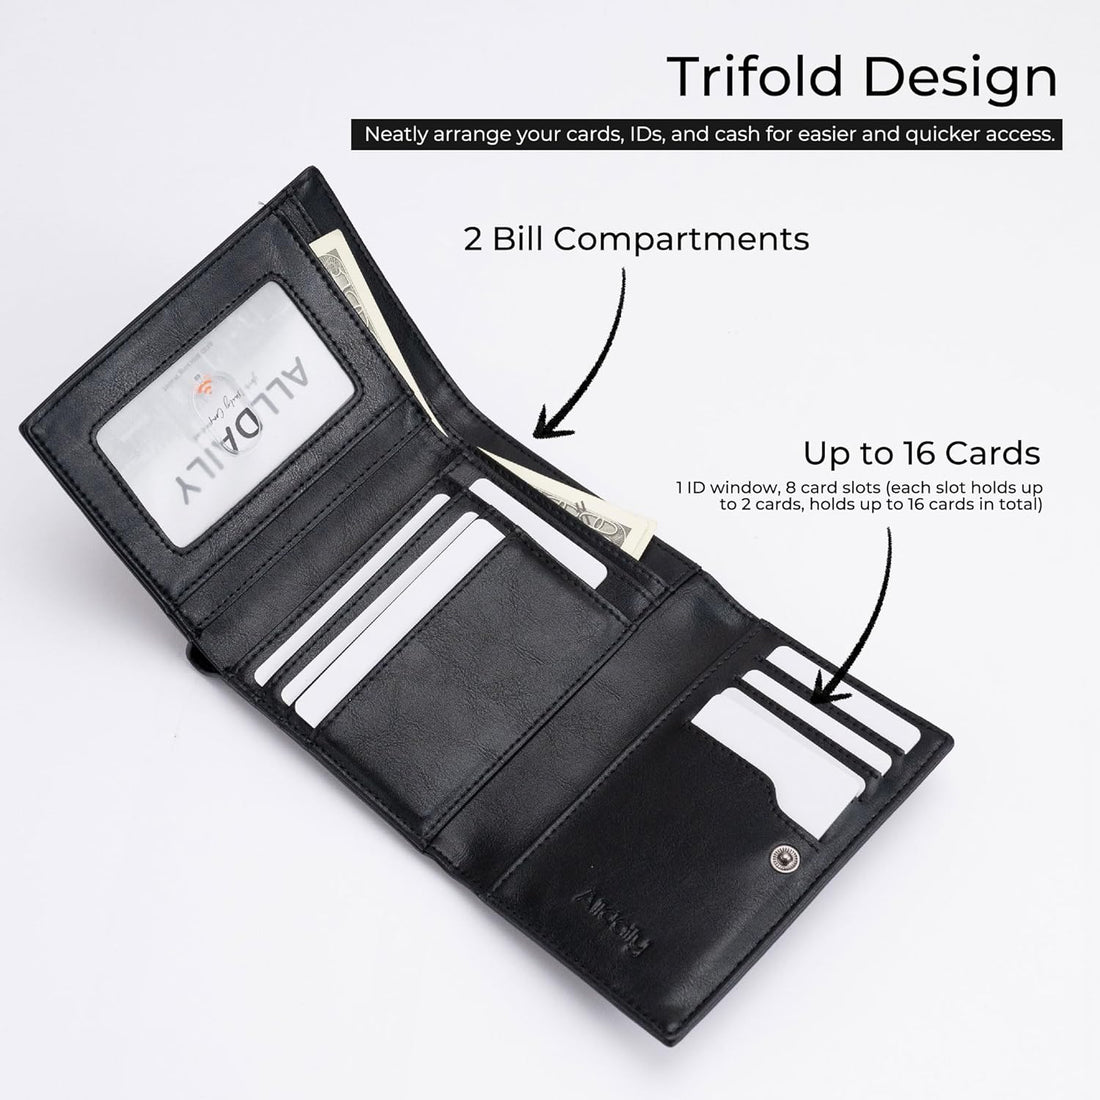 Alldaily Trifold Small RFID Blocking Wallet Slim Credit Card Wallet with with Zipper Pocket, Black